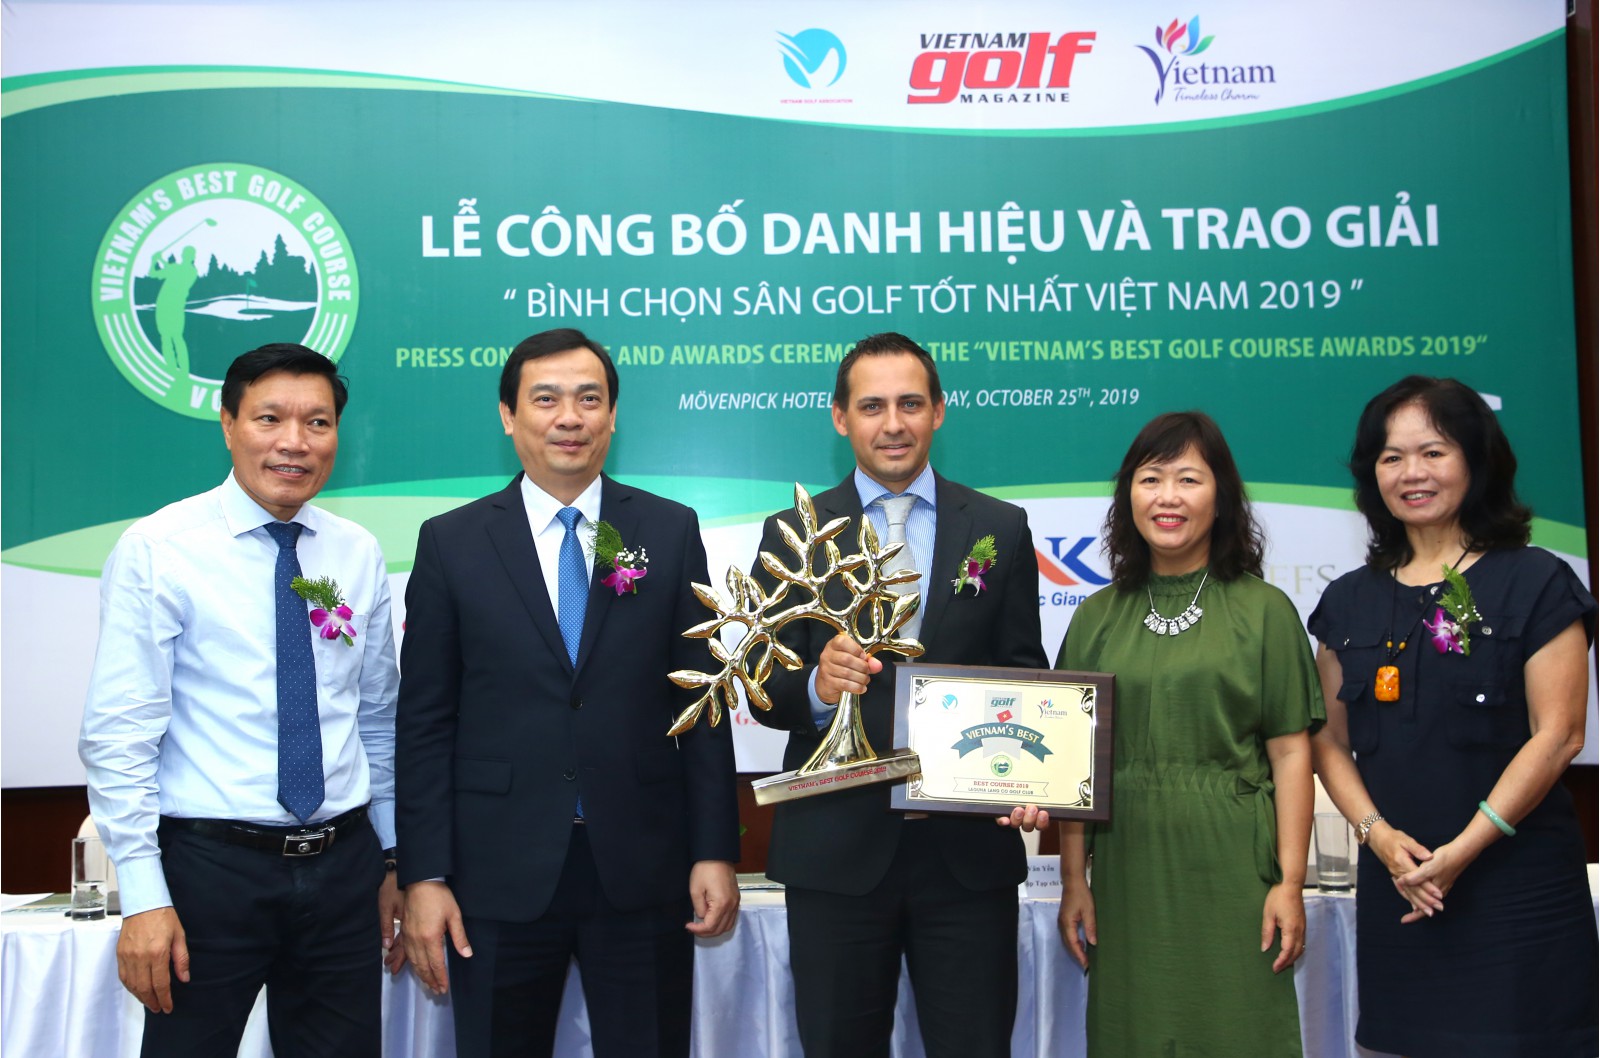 The Organisation Board gave Certificate to Laguna Lang Co Golf Club, the winner of the title "Vietnam's Best Course 2019"